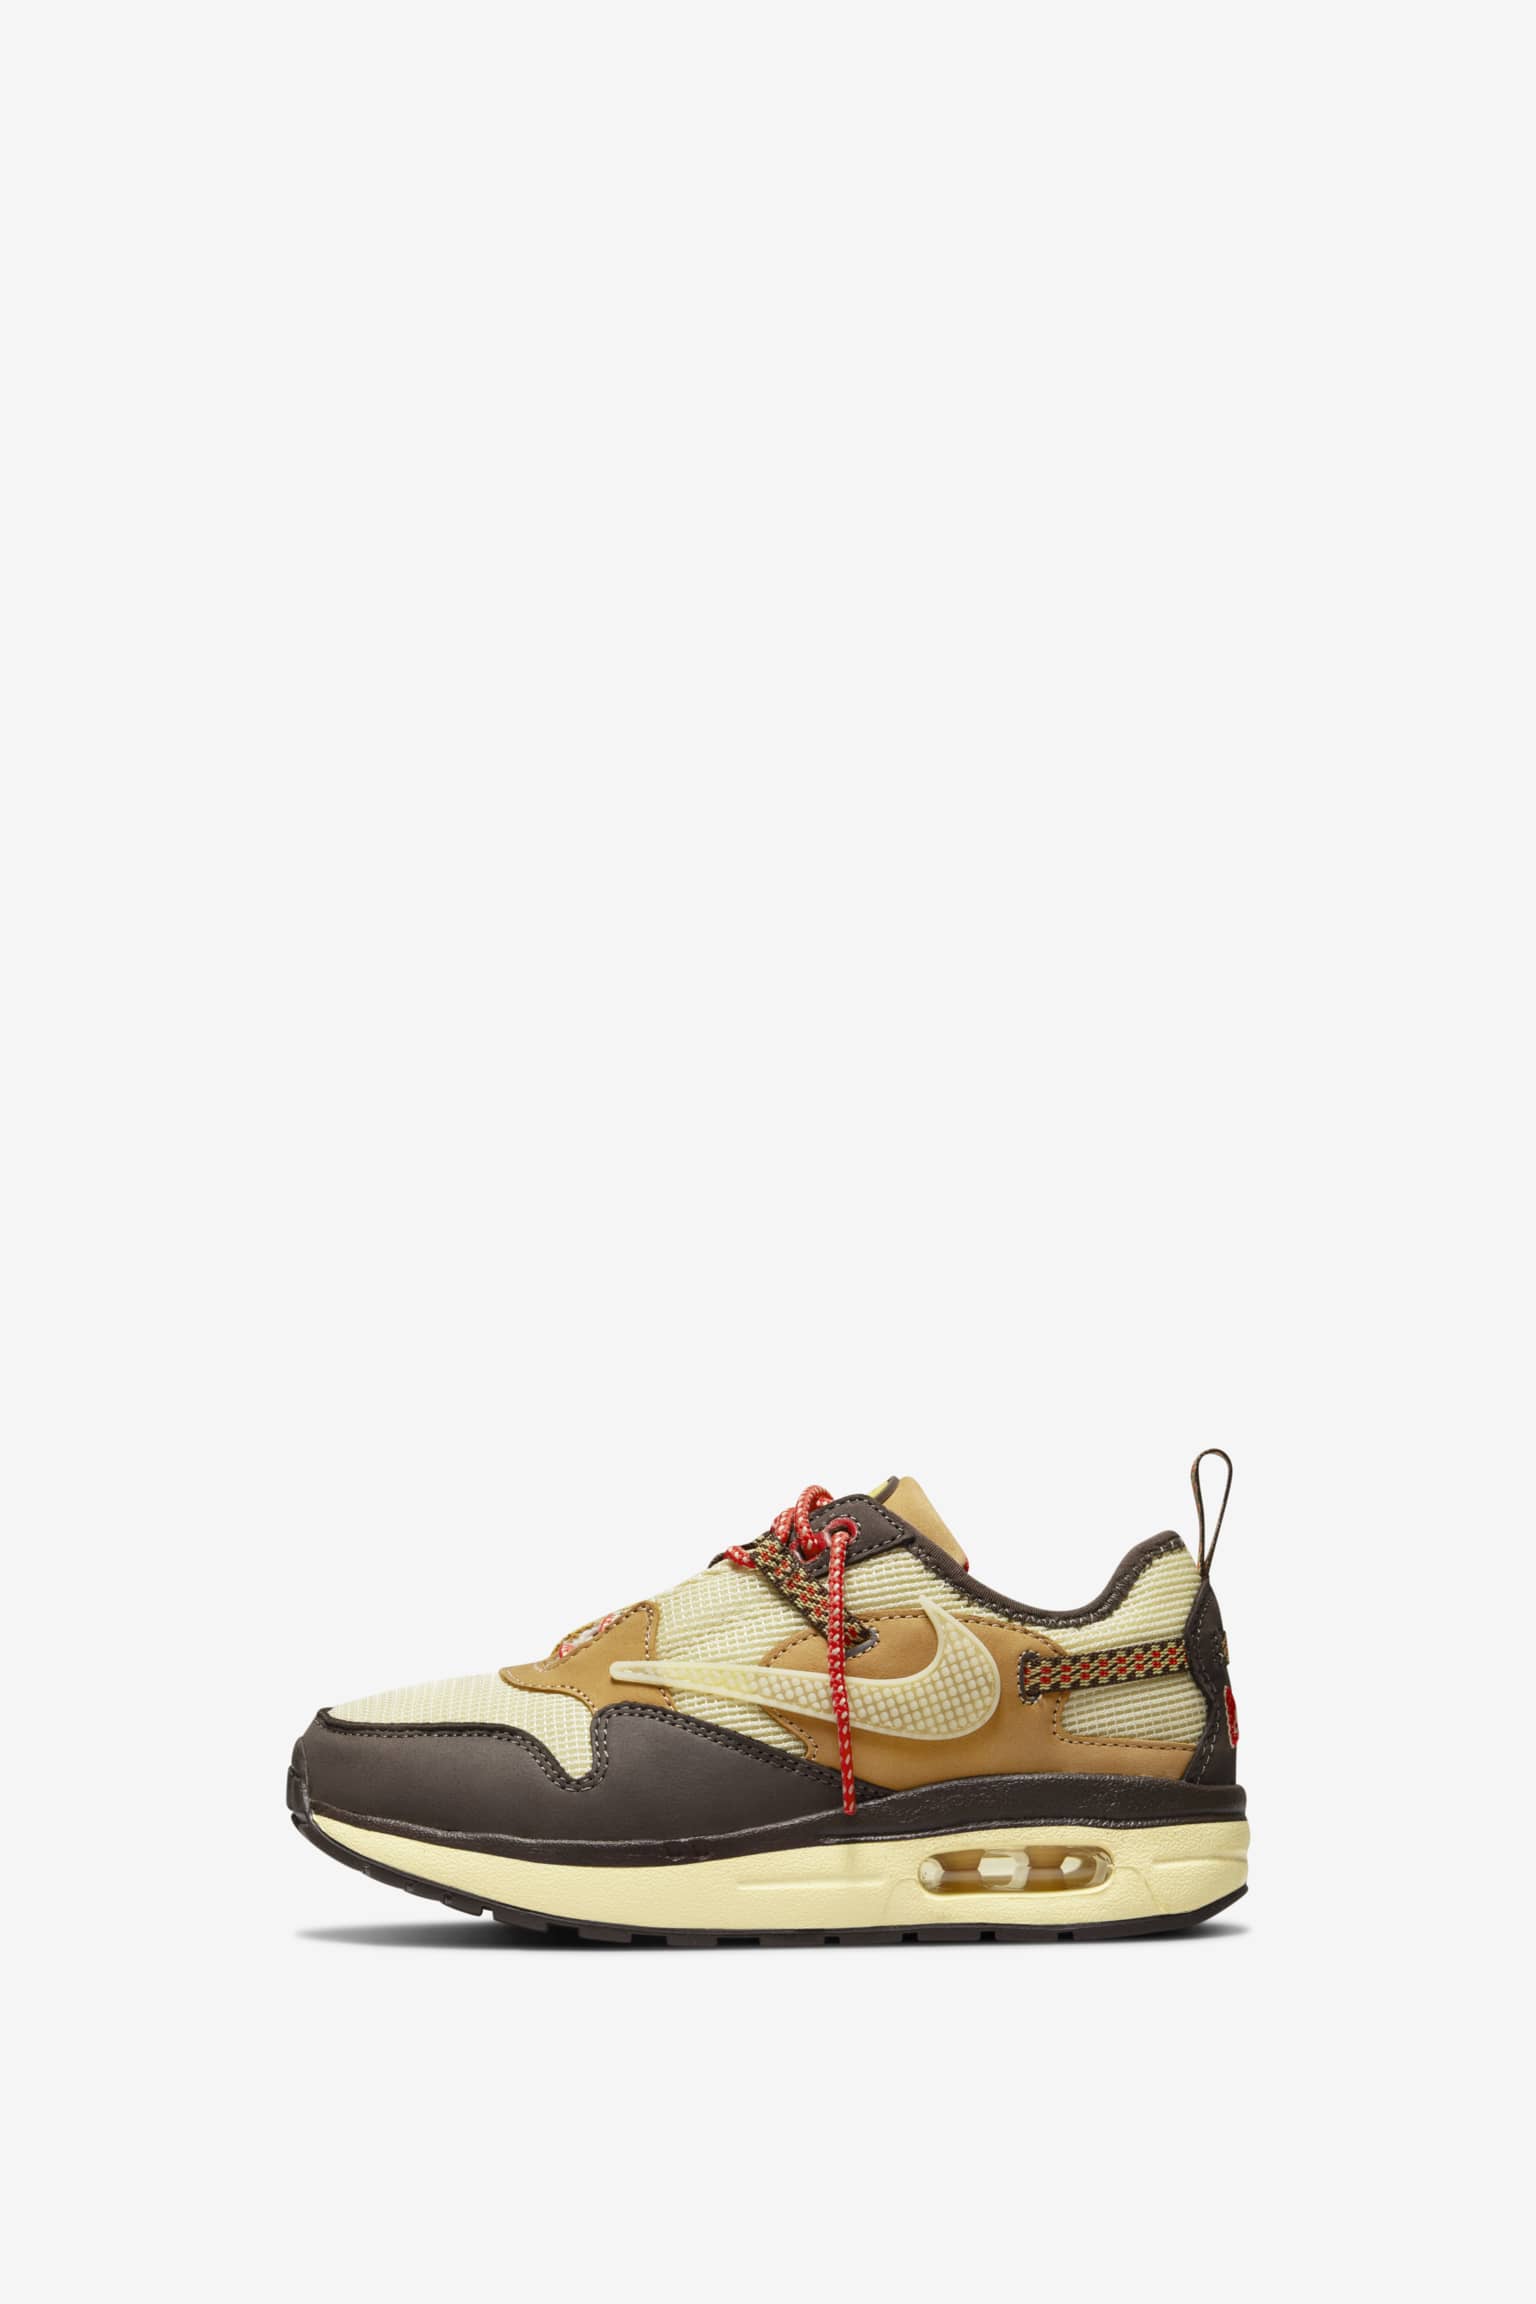 Air Max 1 x CACT.US CORP 'CACT.US Brown' (DO9392-200) 發售日期